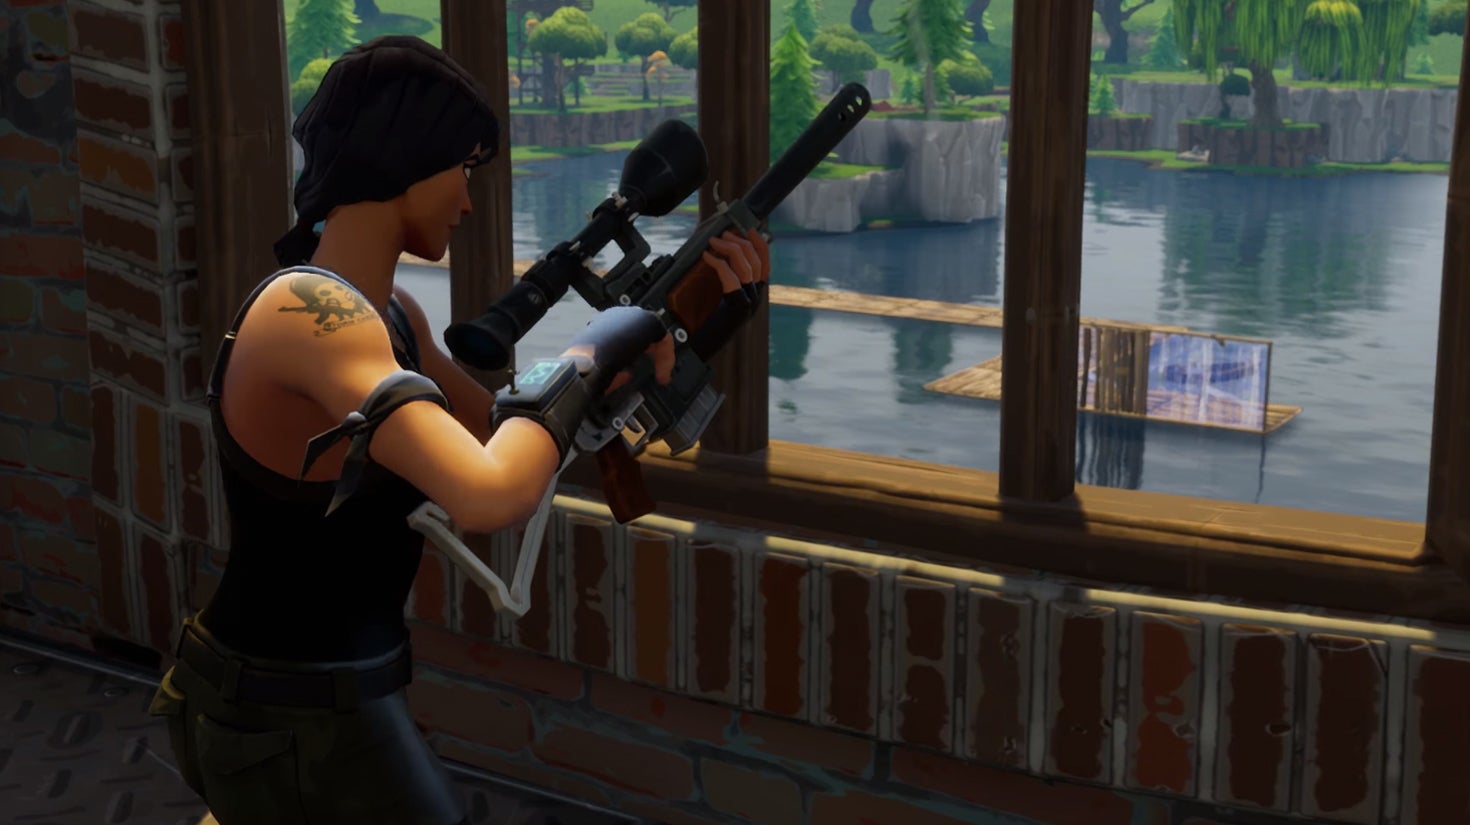 Fortnite tips &amp; tricks: how to dominate the battle royale on your smartphone